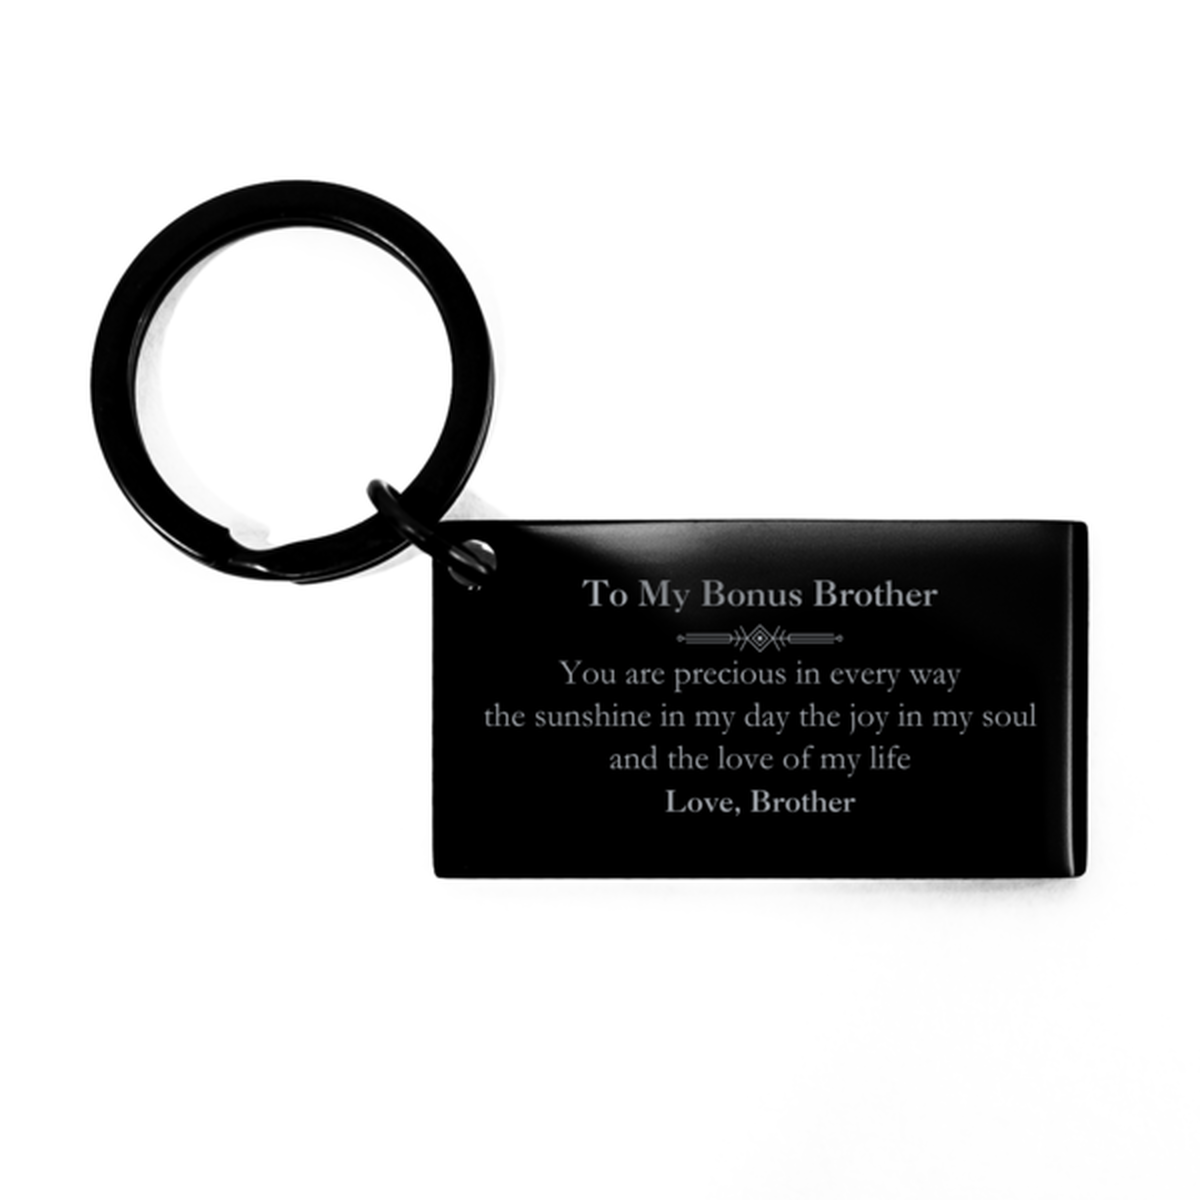 Graduation Gifts for Bonus Brother Keychain Present from Brother, Christmas Bonus Brother Birthday Gifts Bonus Brother You are precious in every way the sunshine in my day. Love, Brother